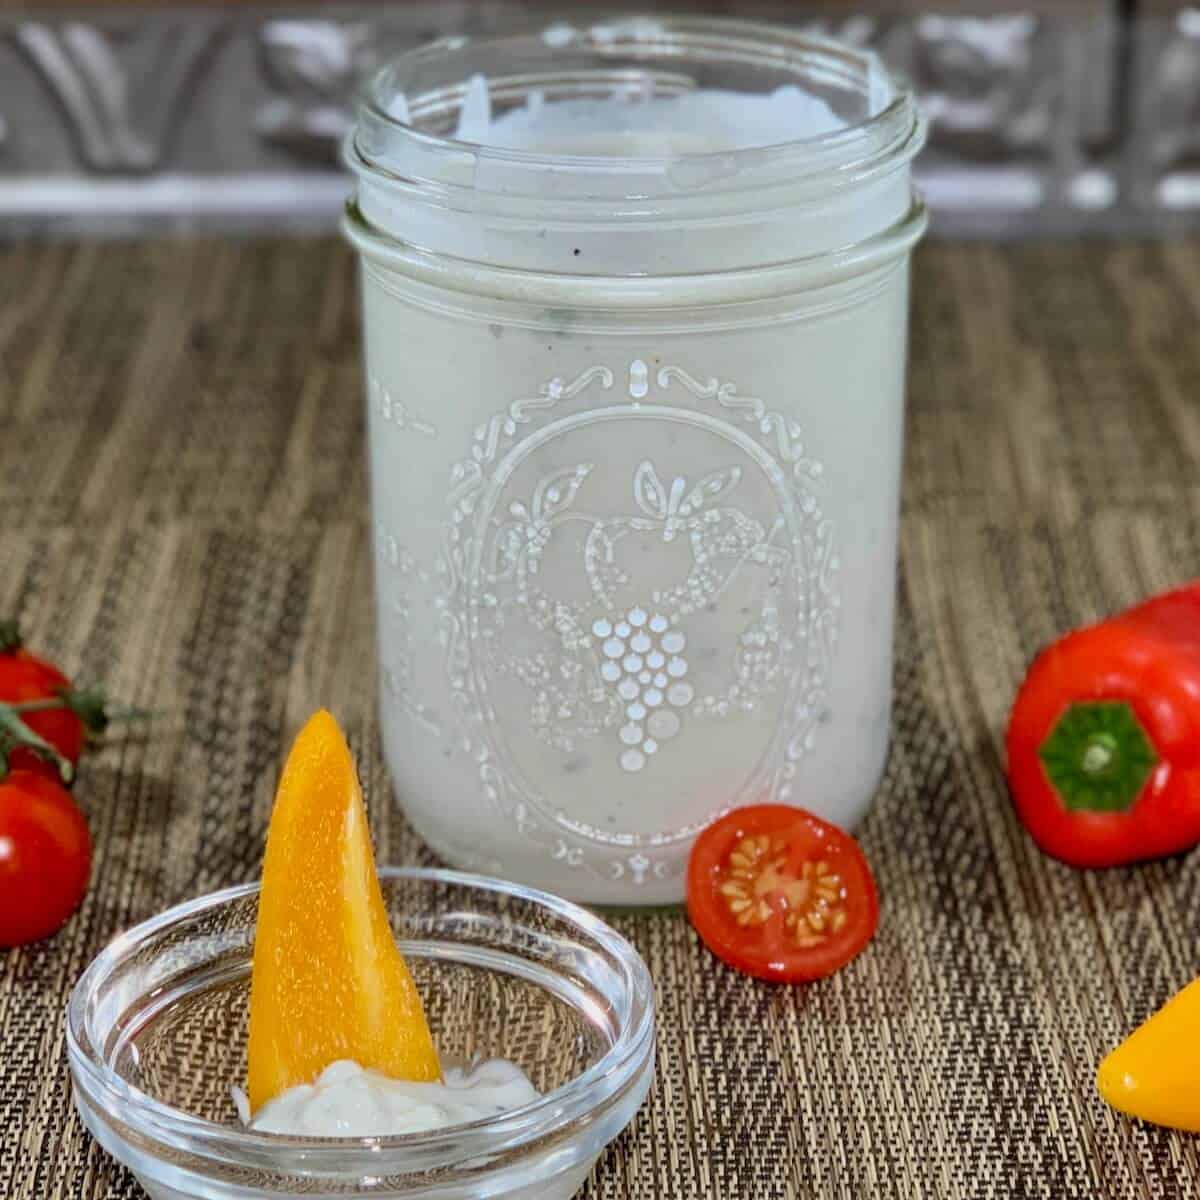 Buttermilk blue cheese dressing in a jar surrounded by tomatoes & cut bell peppers.